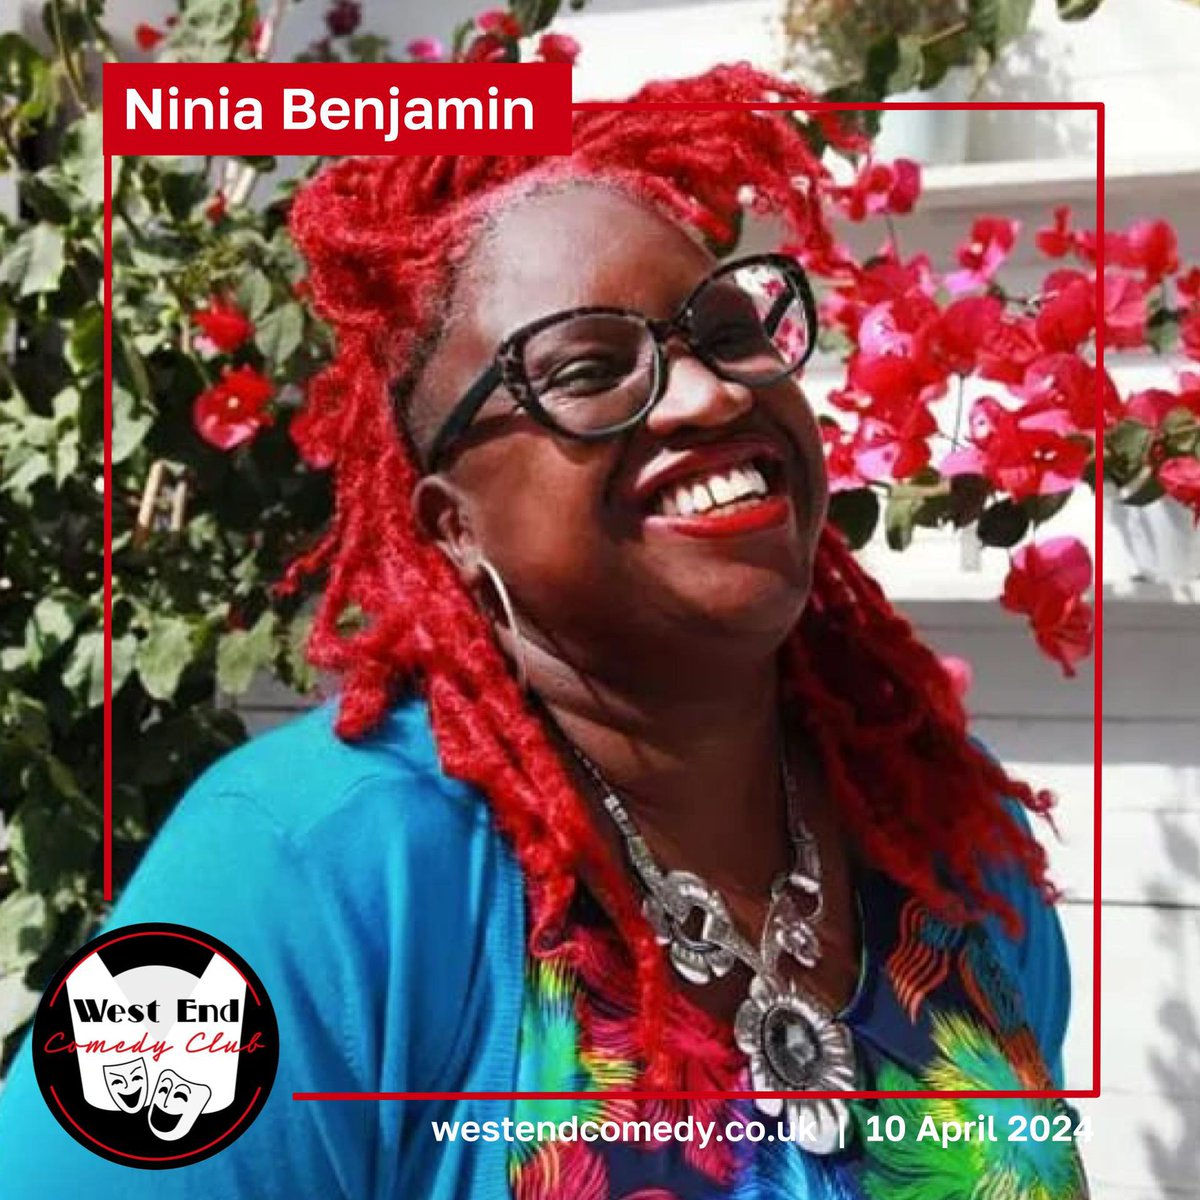 Headlining tonight the crazy funny Ninia Benjamin ❗️ Tickets only £12 - don't miss out! westendcomedy.co.uk/shows/live-sta…